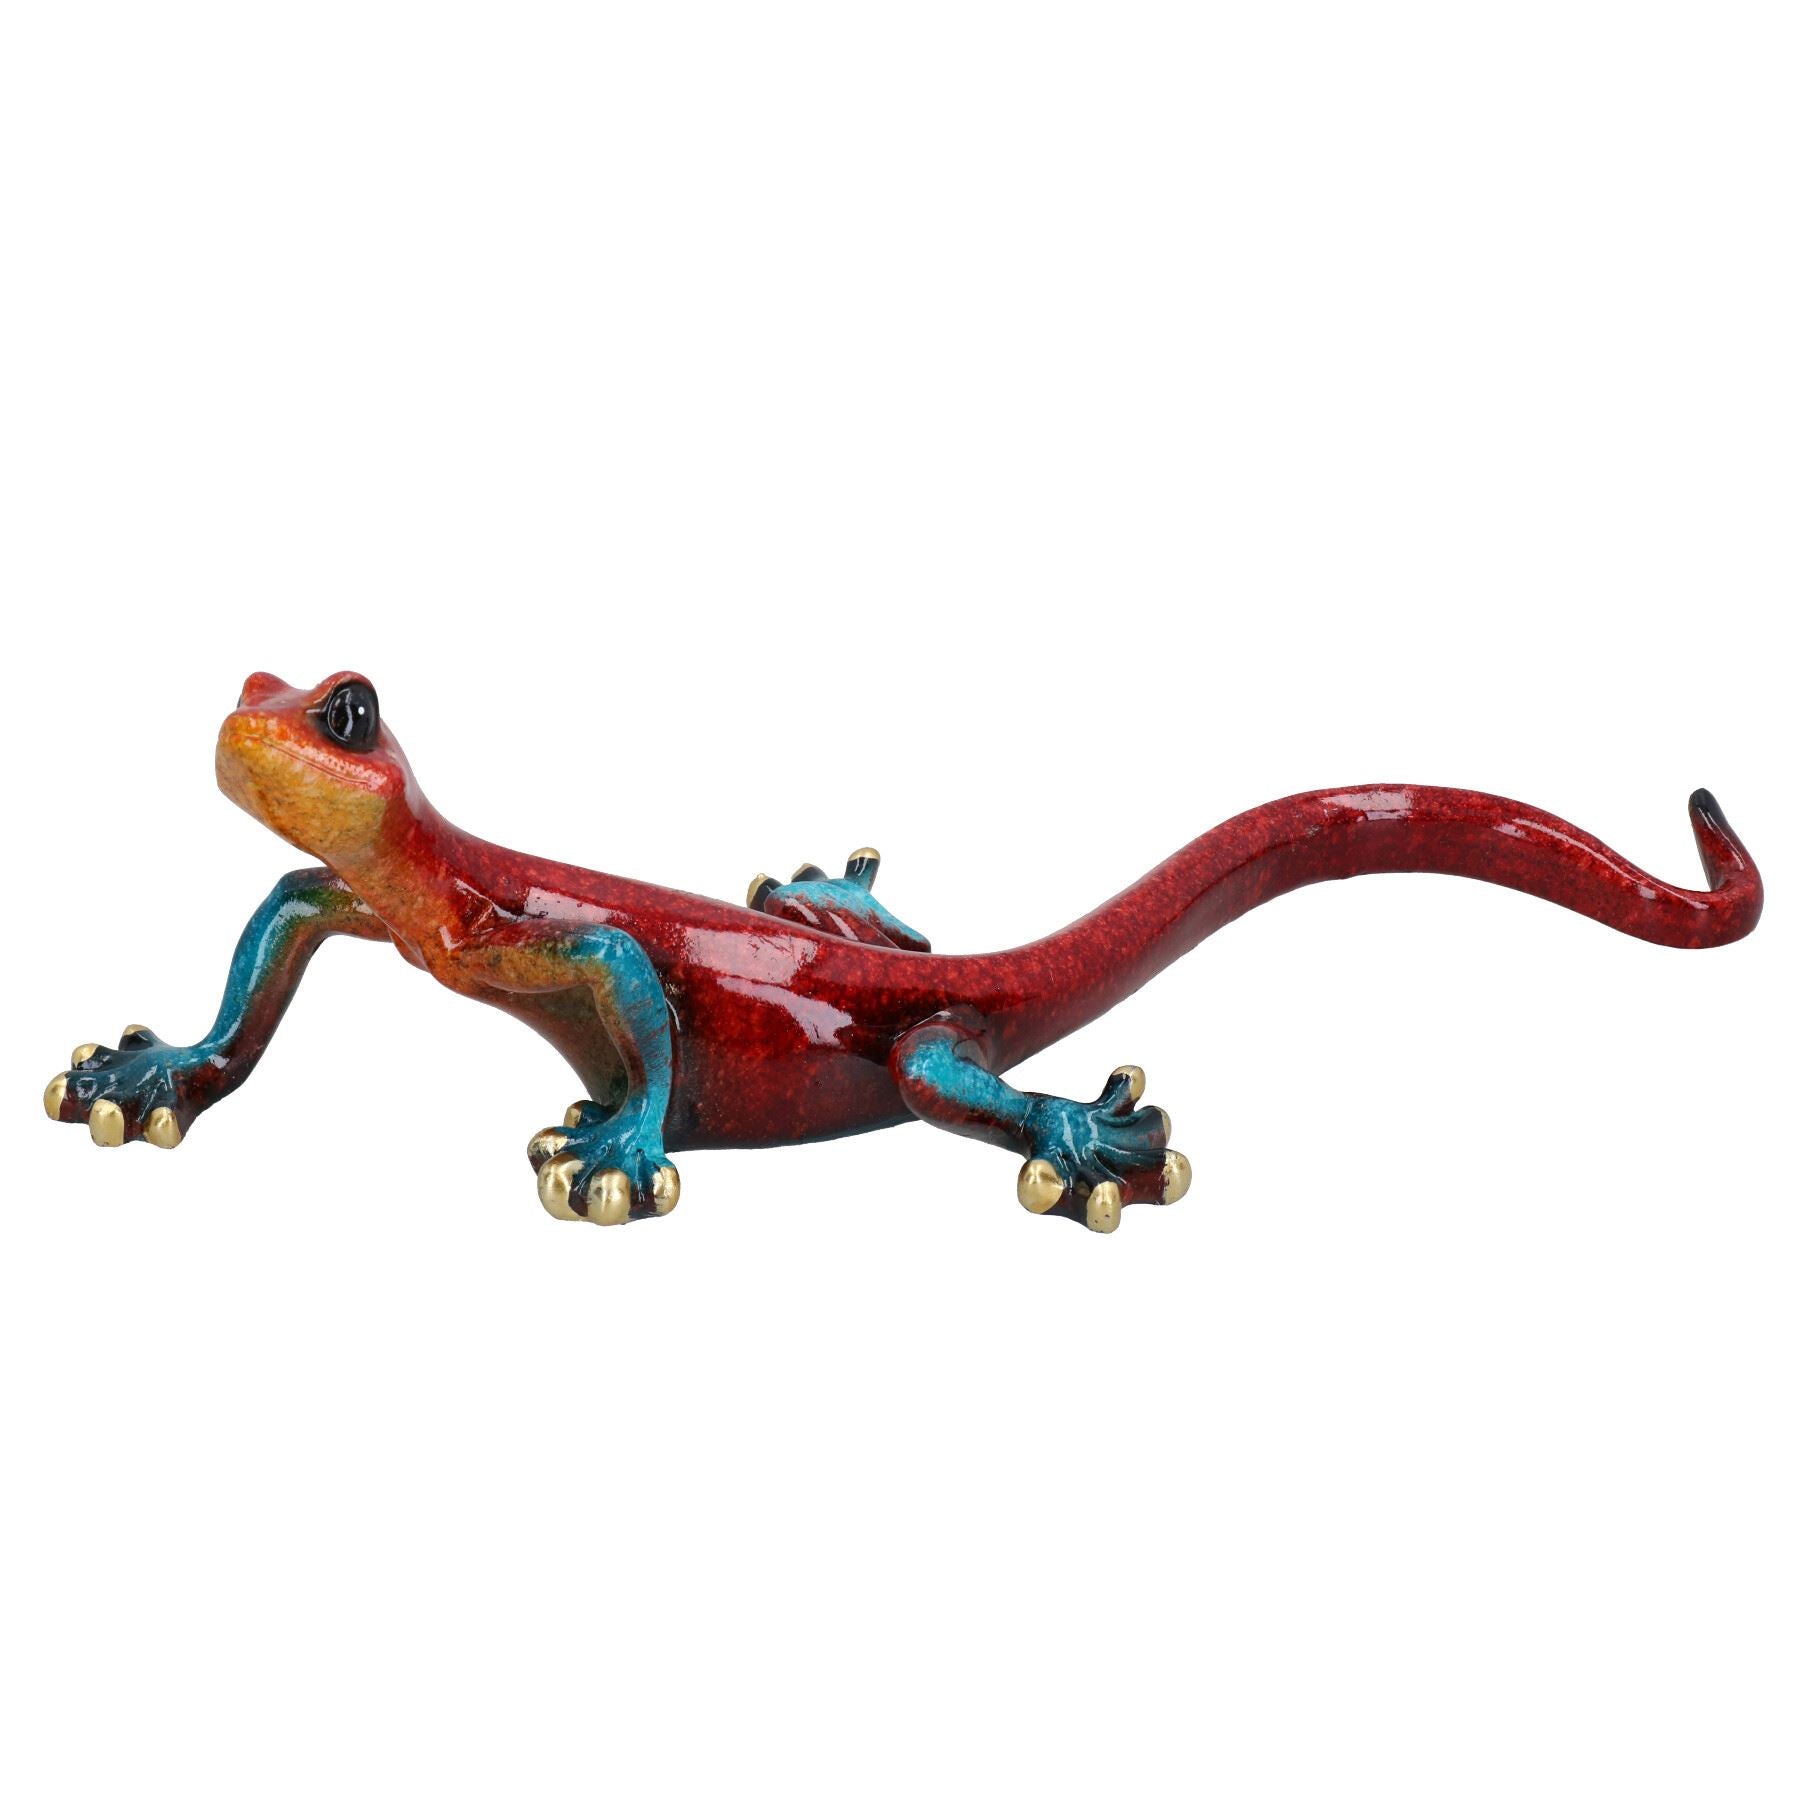 Red Speckled Gecko Lizard Resin Wall Shed Sculpture Decor Statue Small House